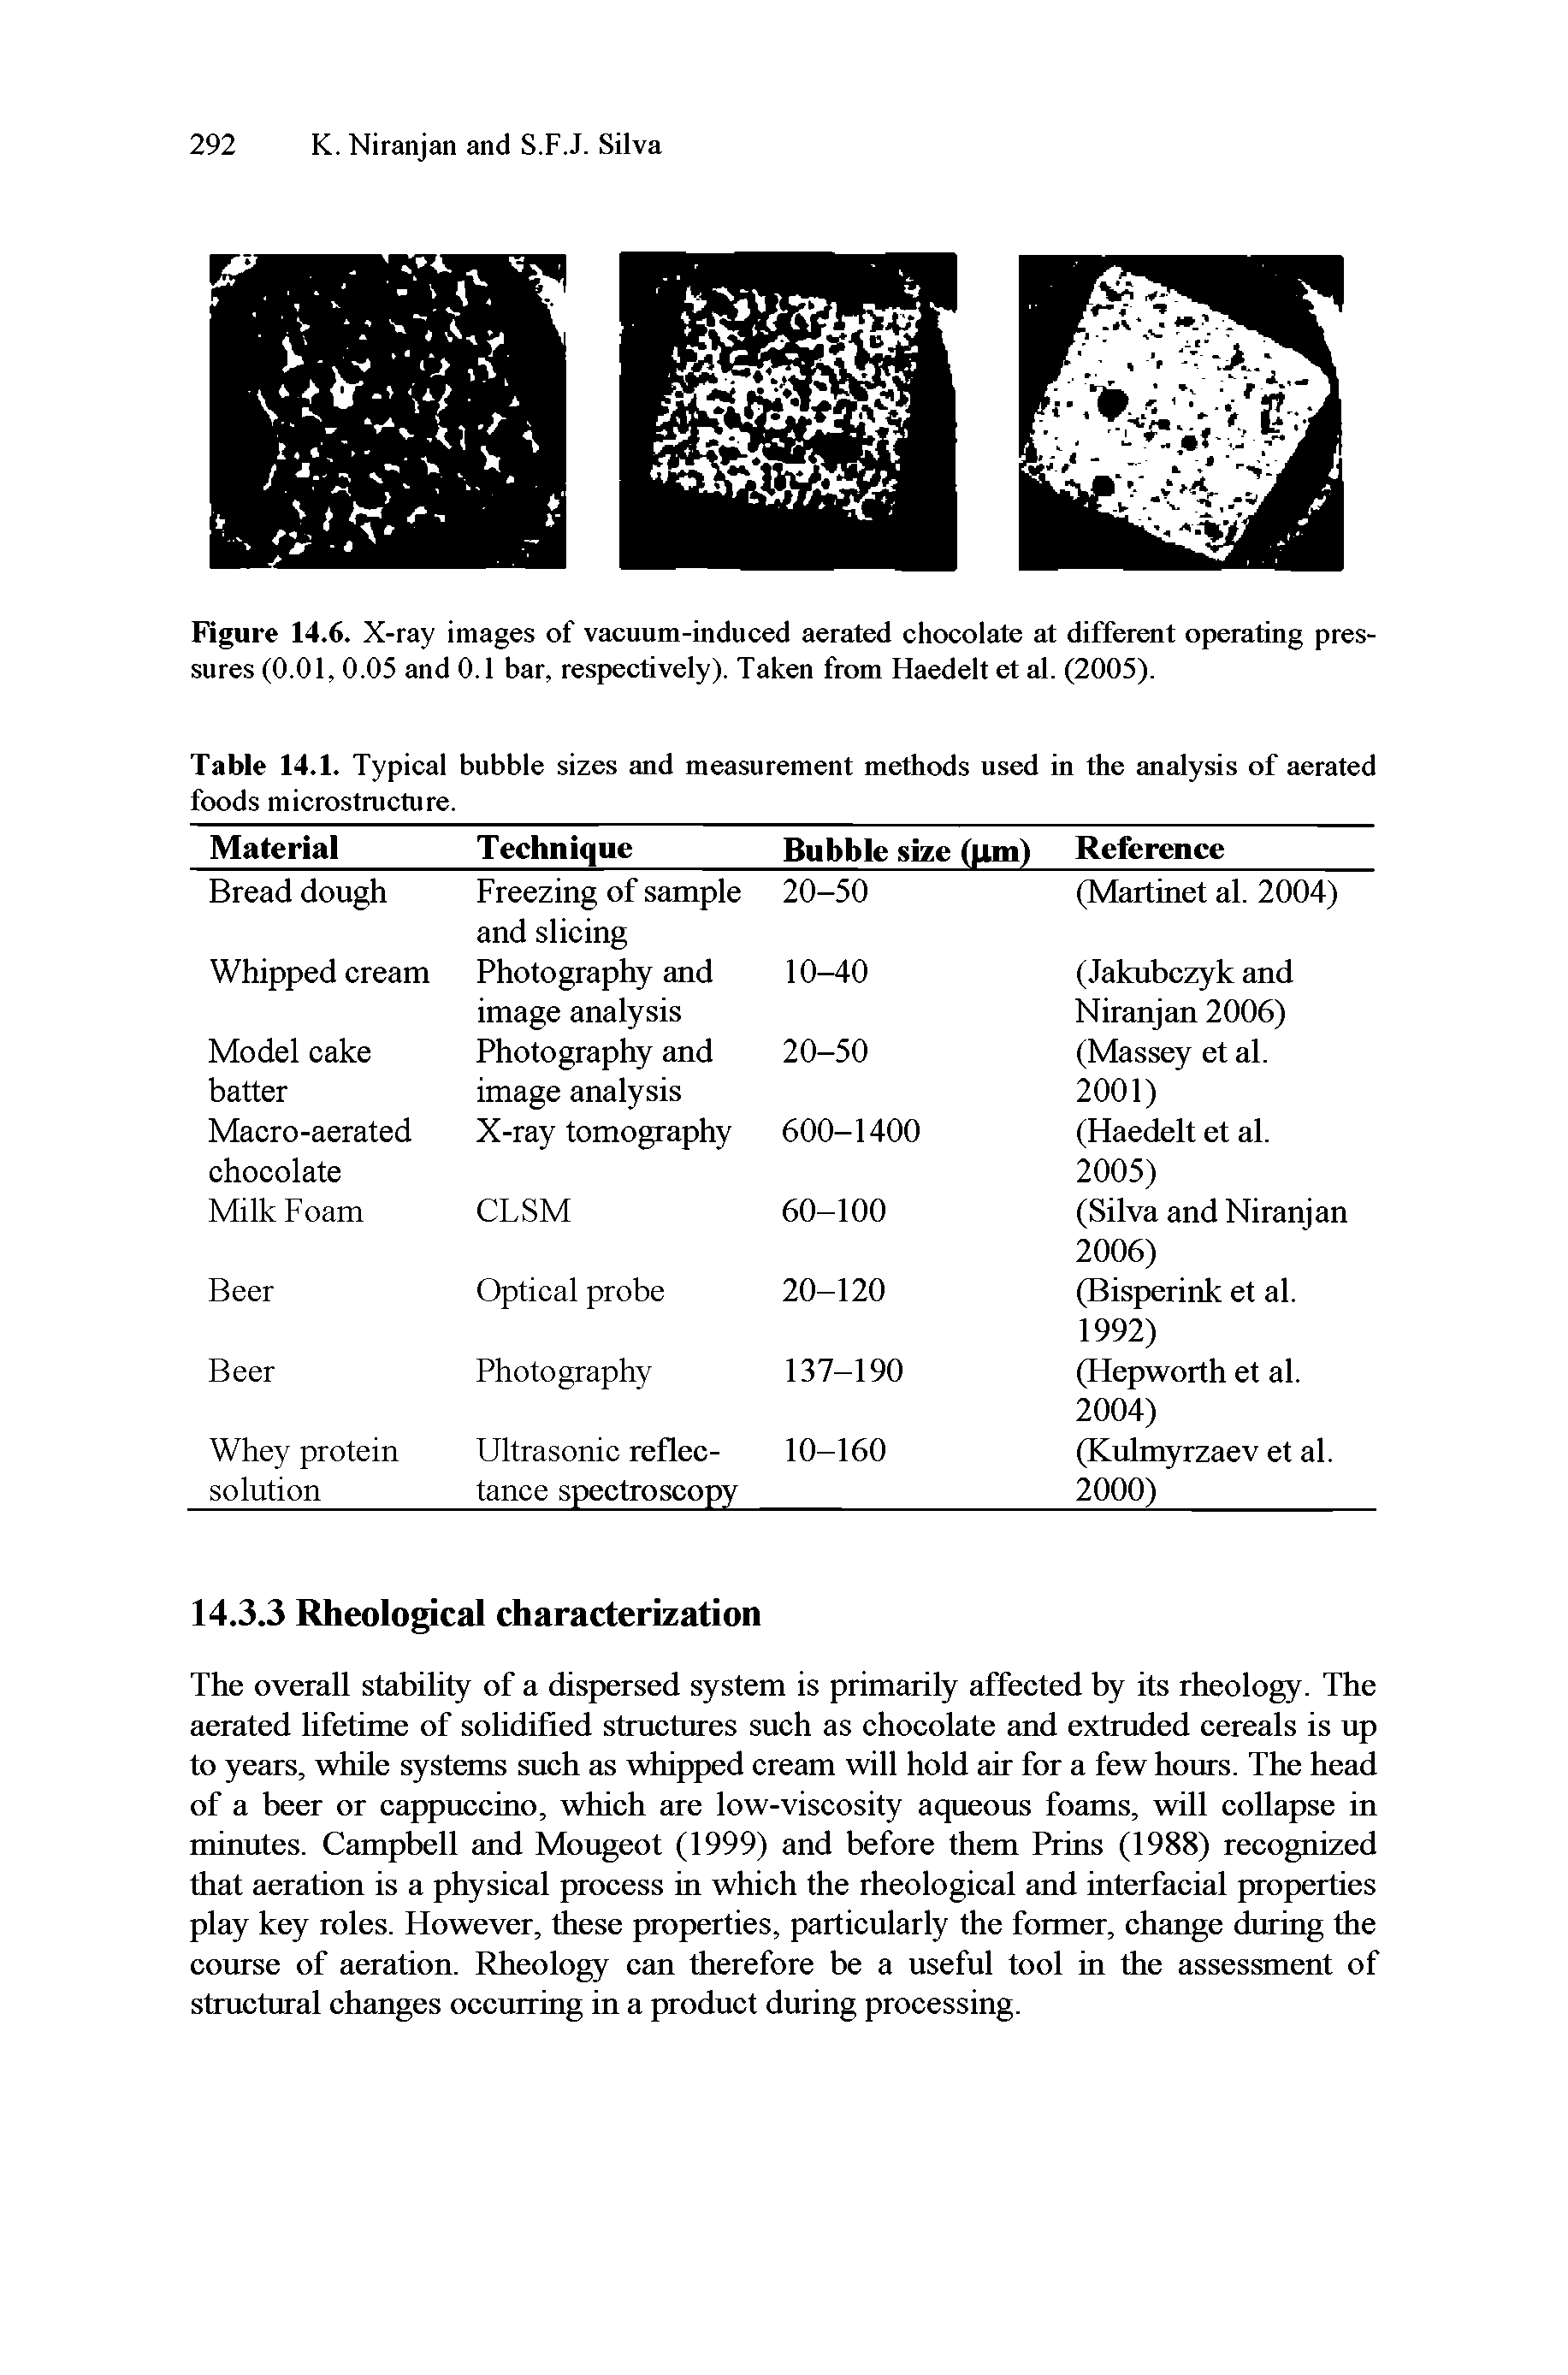 Table 14.1. Typical bubble sizes and measurement methods used in the analysis of aerated foods microstructure.